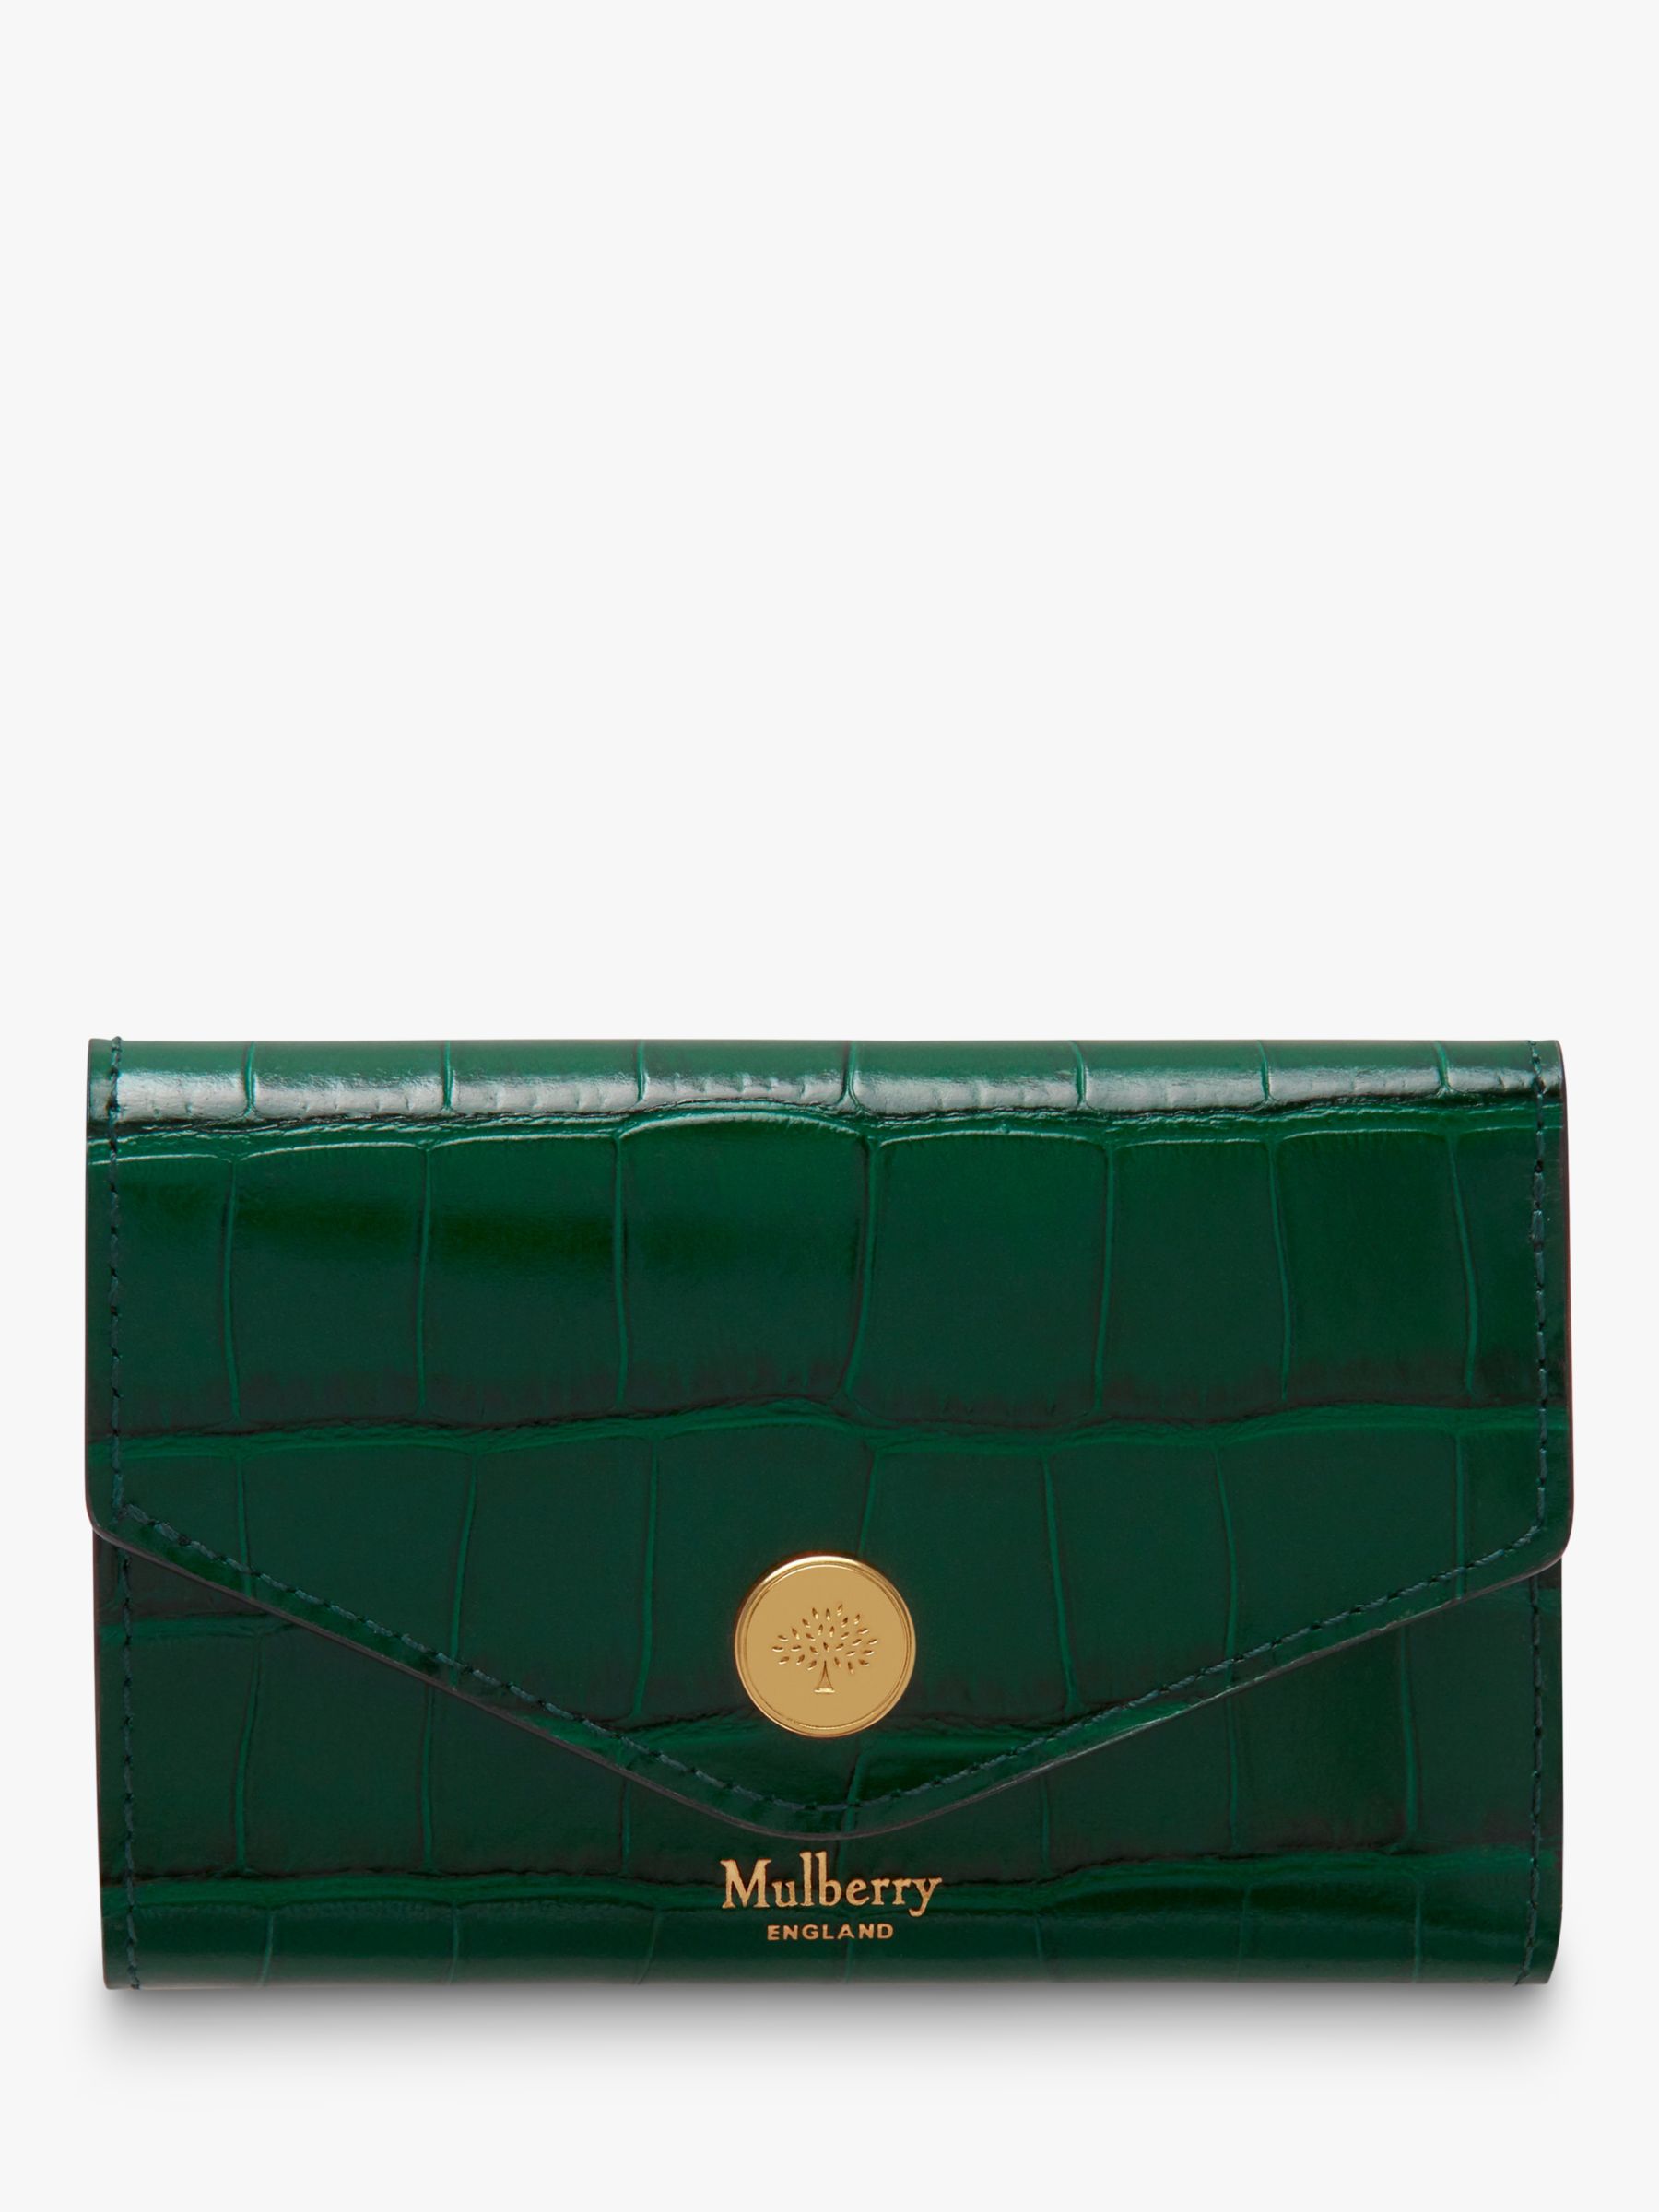 Mulberry Croc Print Folded Multi-Card Wallet, Jungle Green at John Lewis & Partners